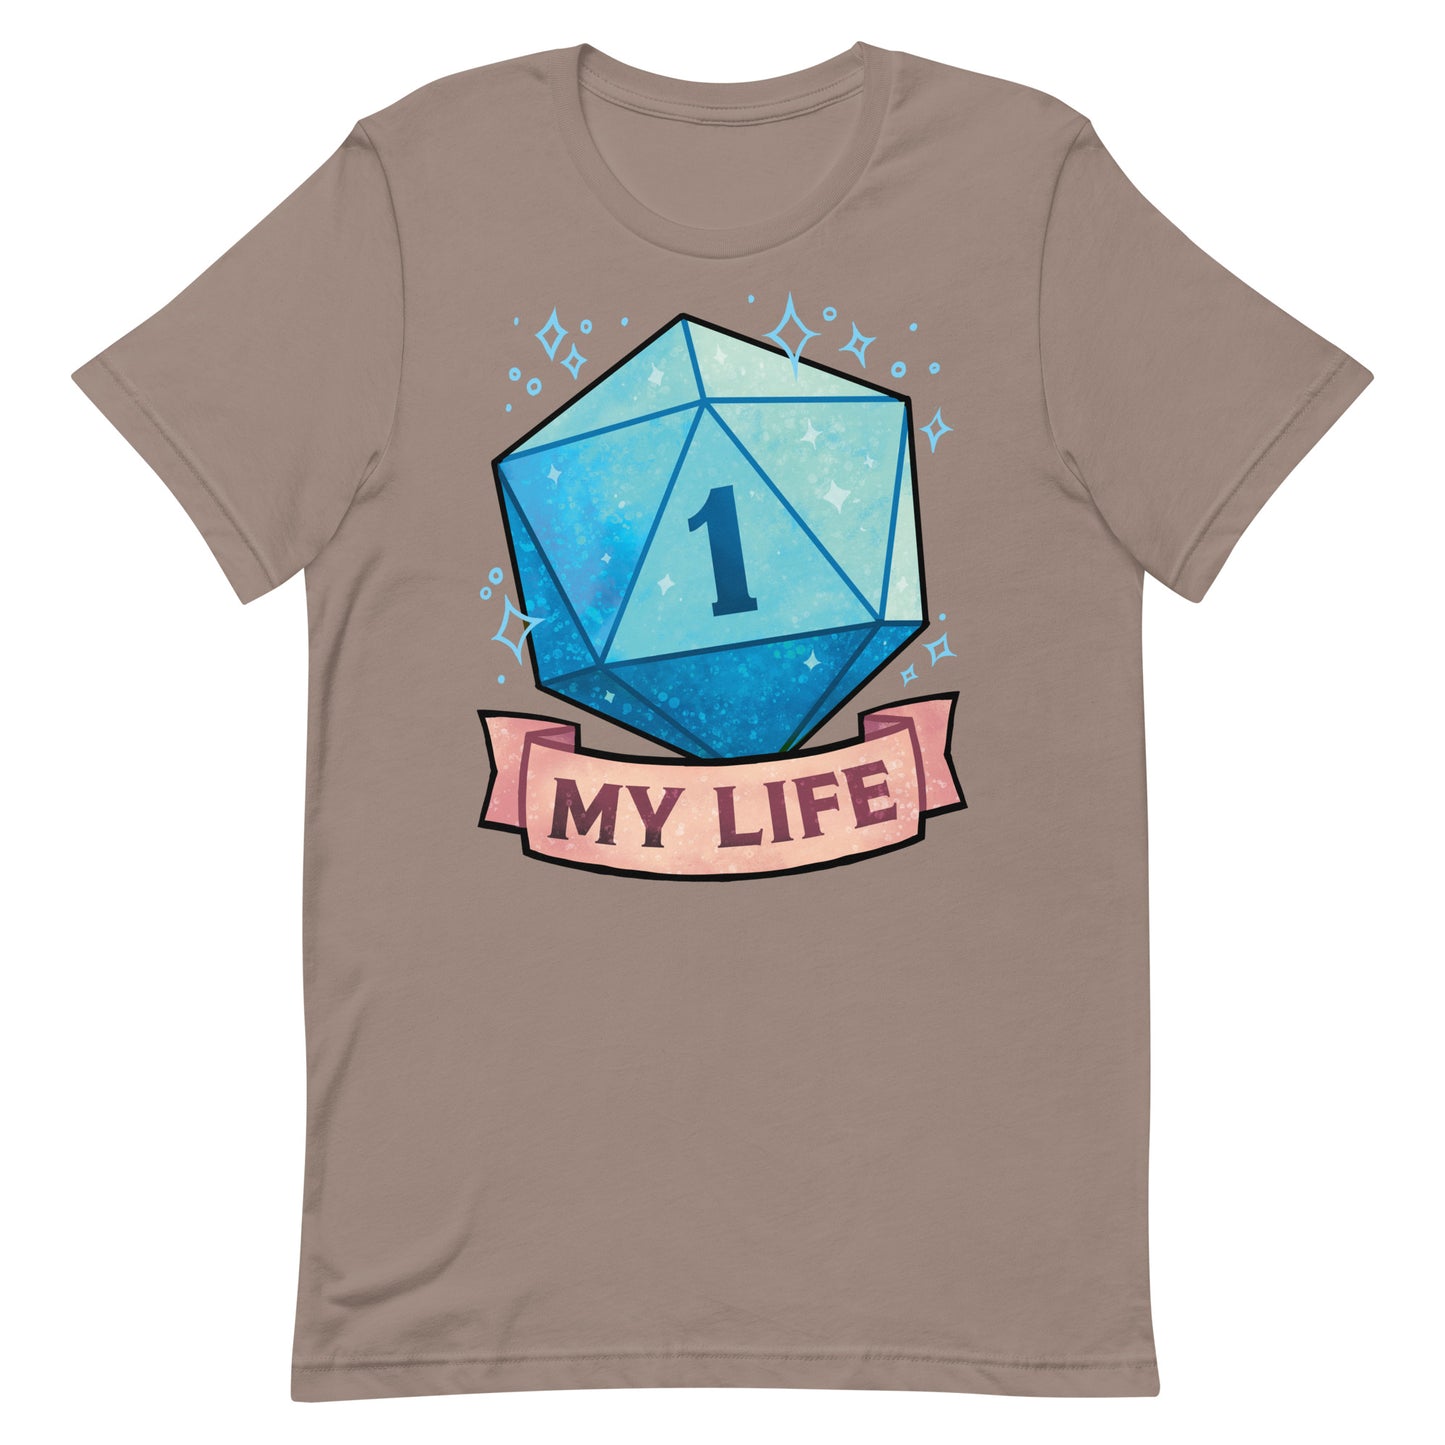 Life's Natural 1 Unisex T-Shirt by The Shirt Hoard